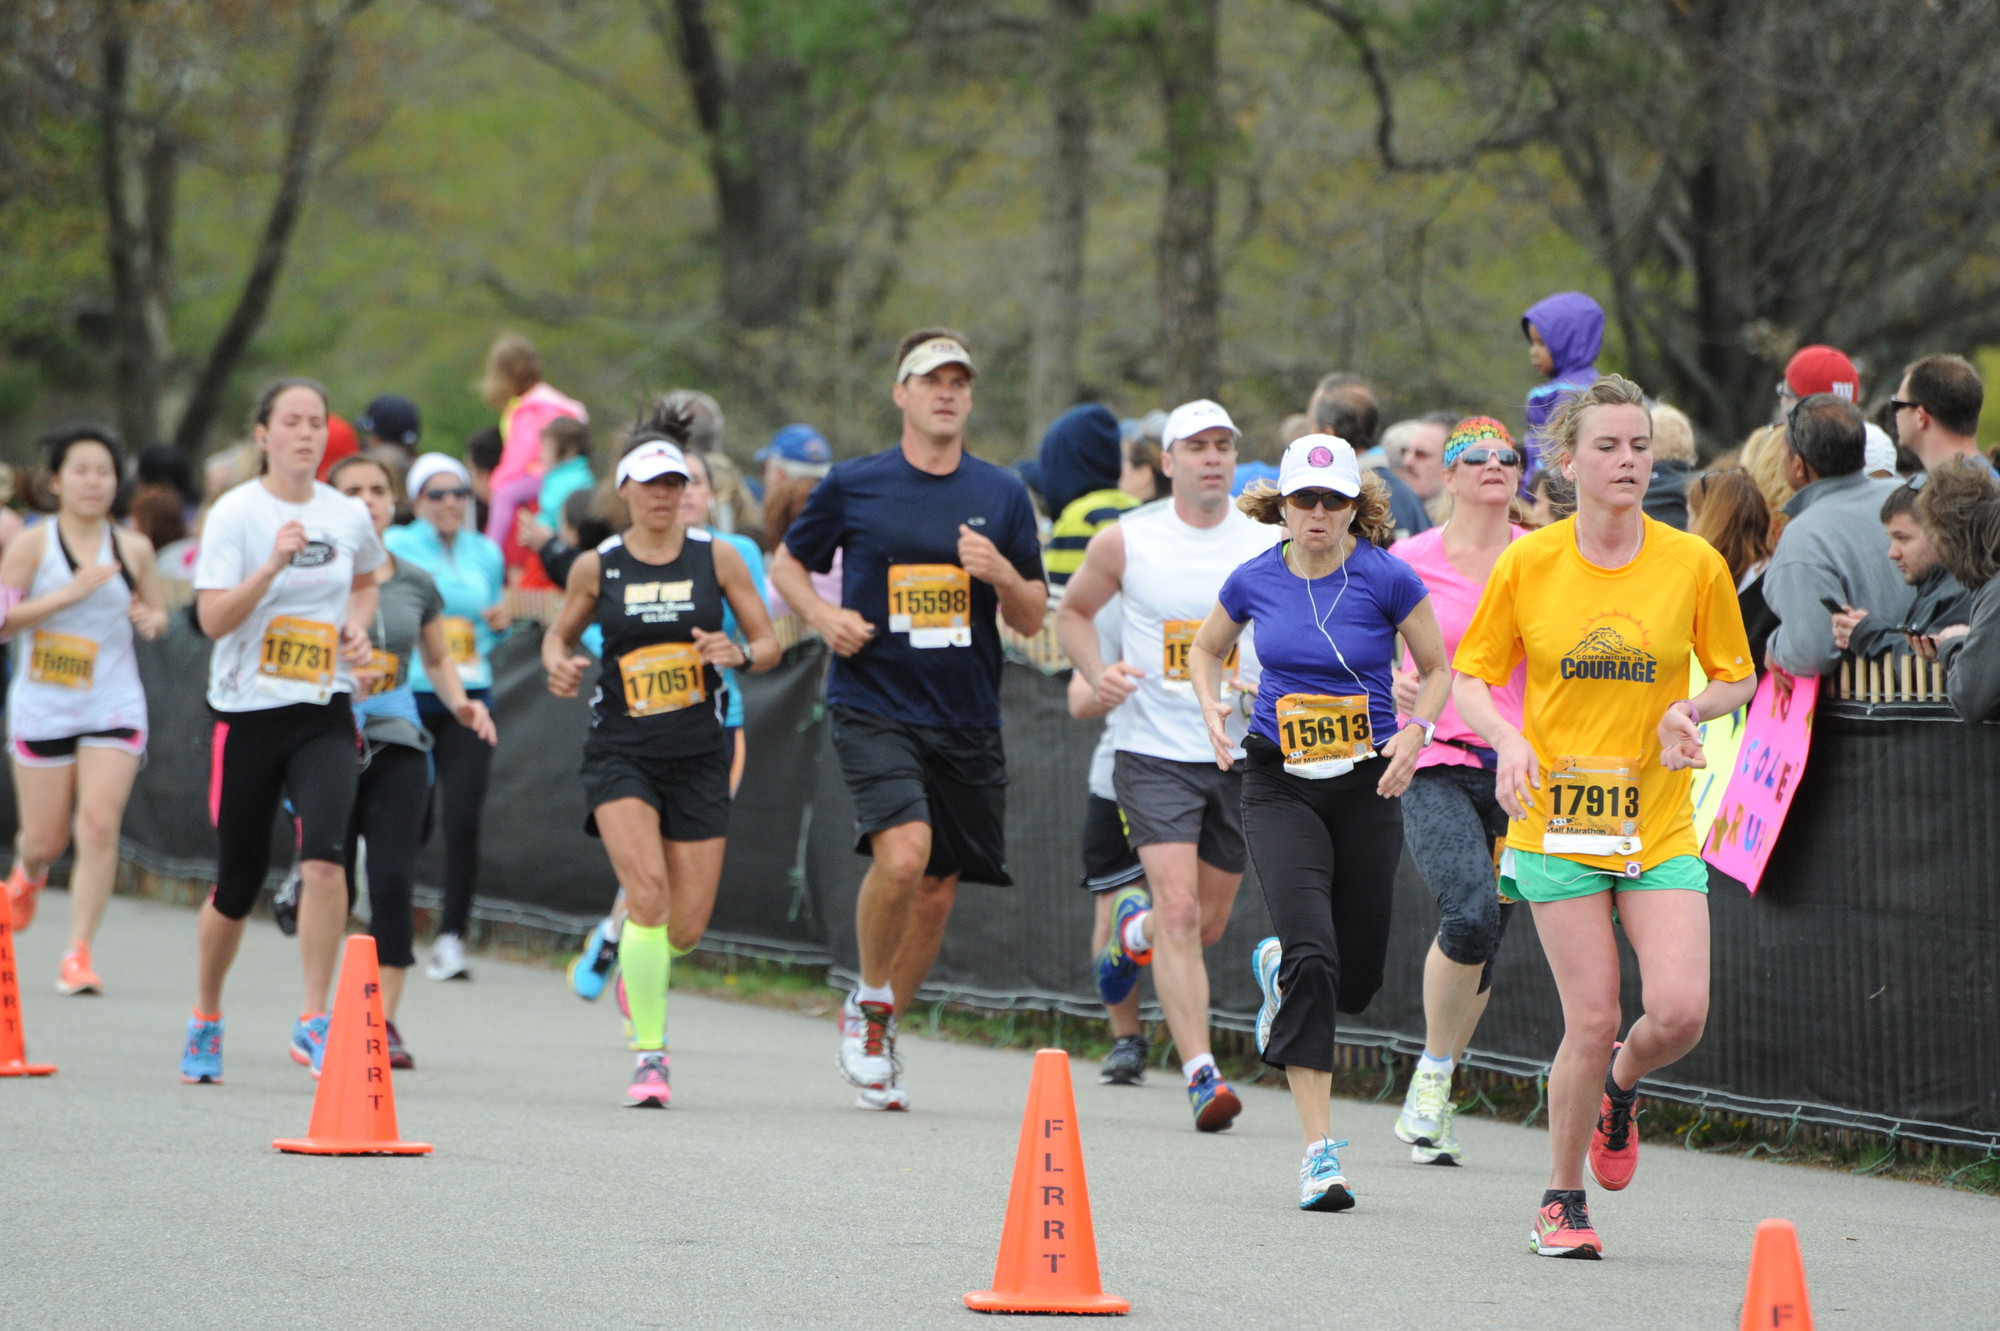 More than 7,000 runners participated in the Long Island Marathon’s various races last weekend, including the 13.1 half marathon, pictured above.